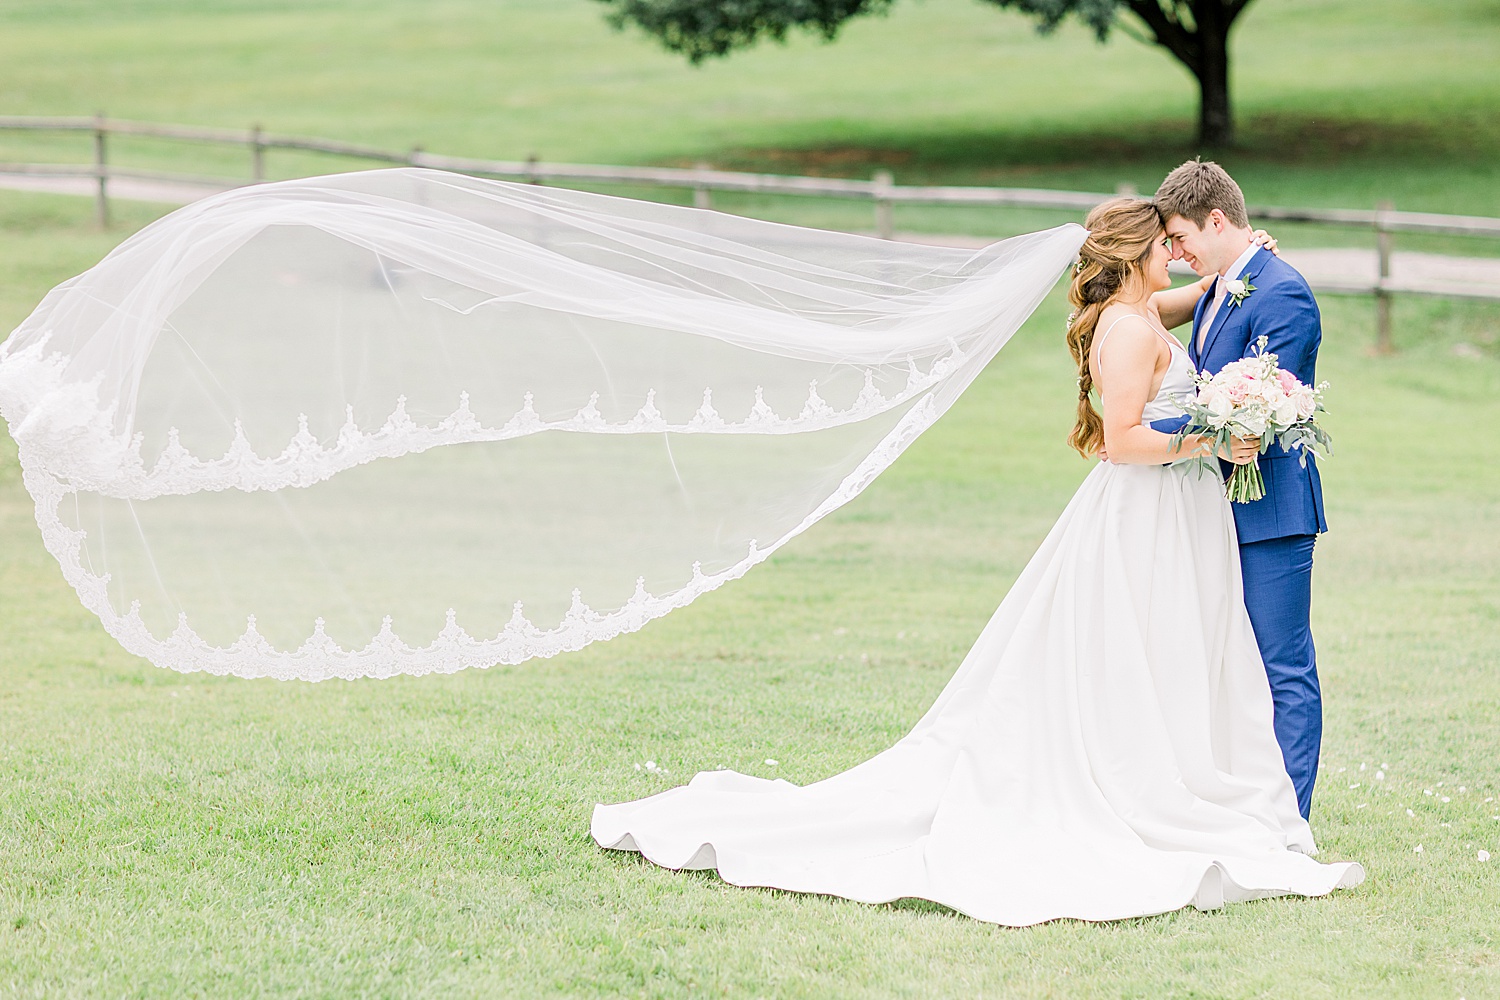 bride and groom after wedding ceremony in AL as Bride's veil flows in the wind